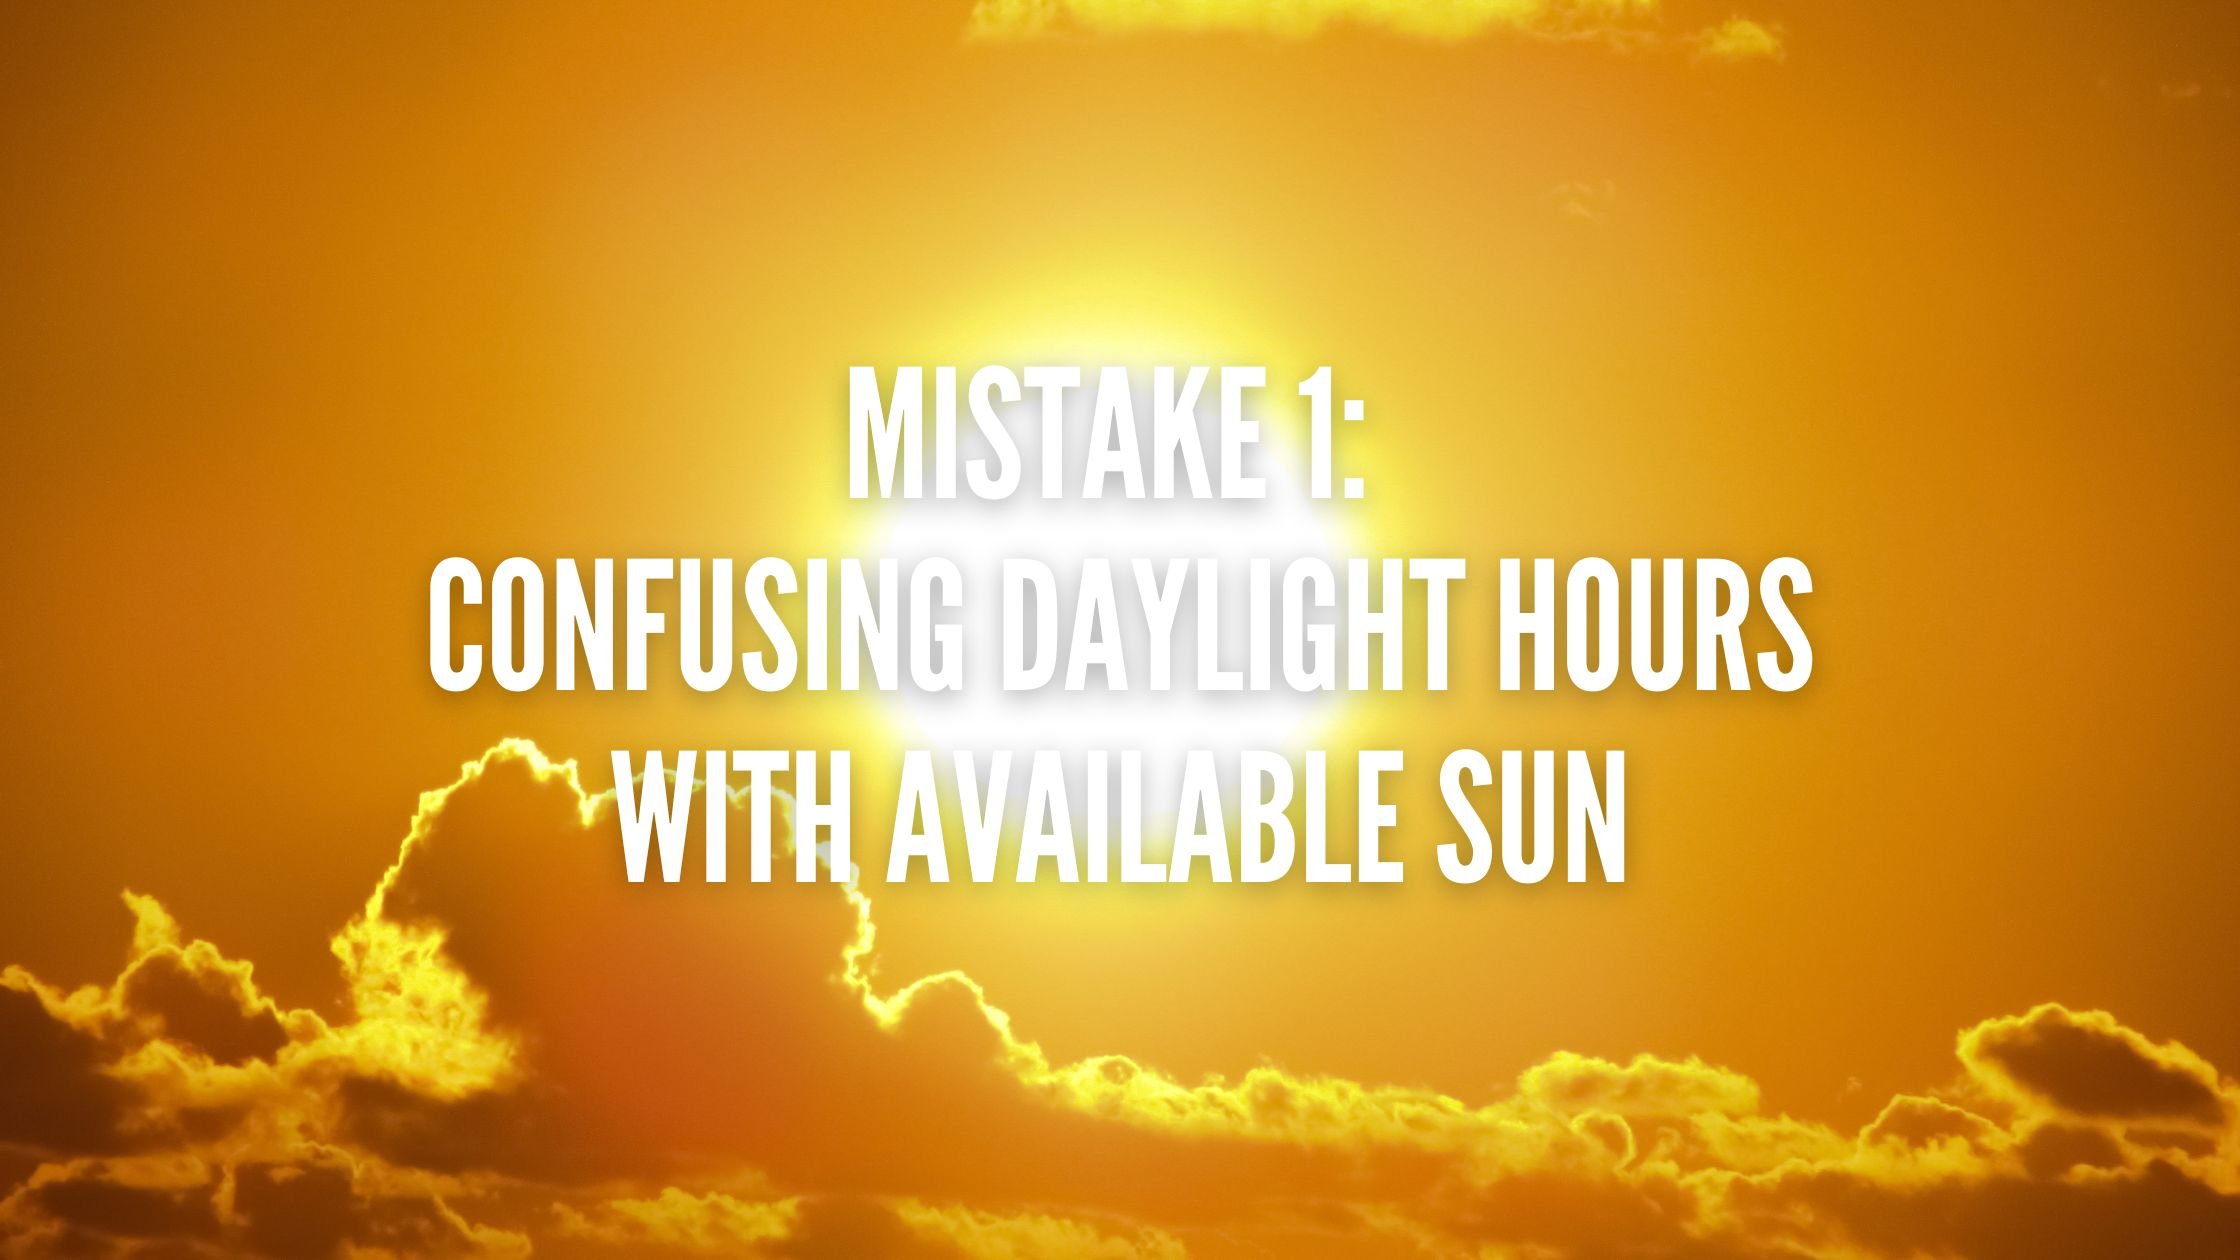 Mistake 1 Confusing Daylight Hours with Available Sun